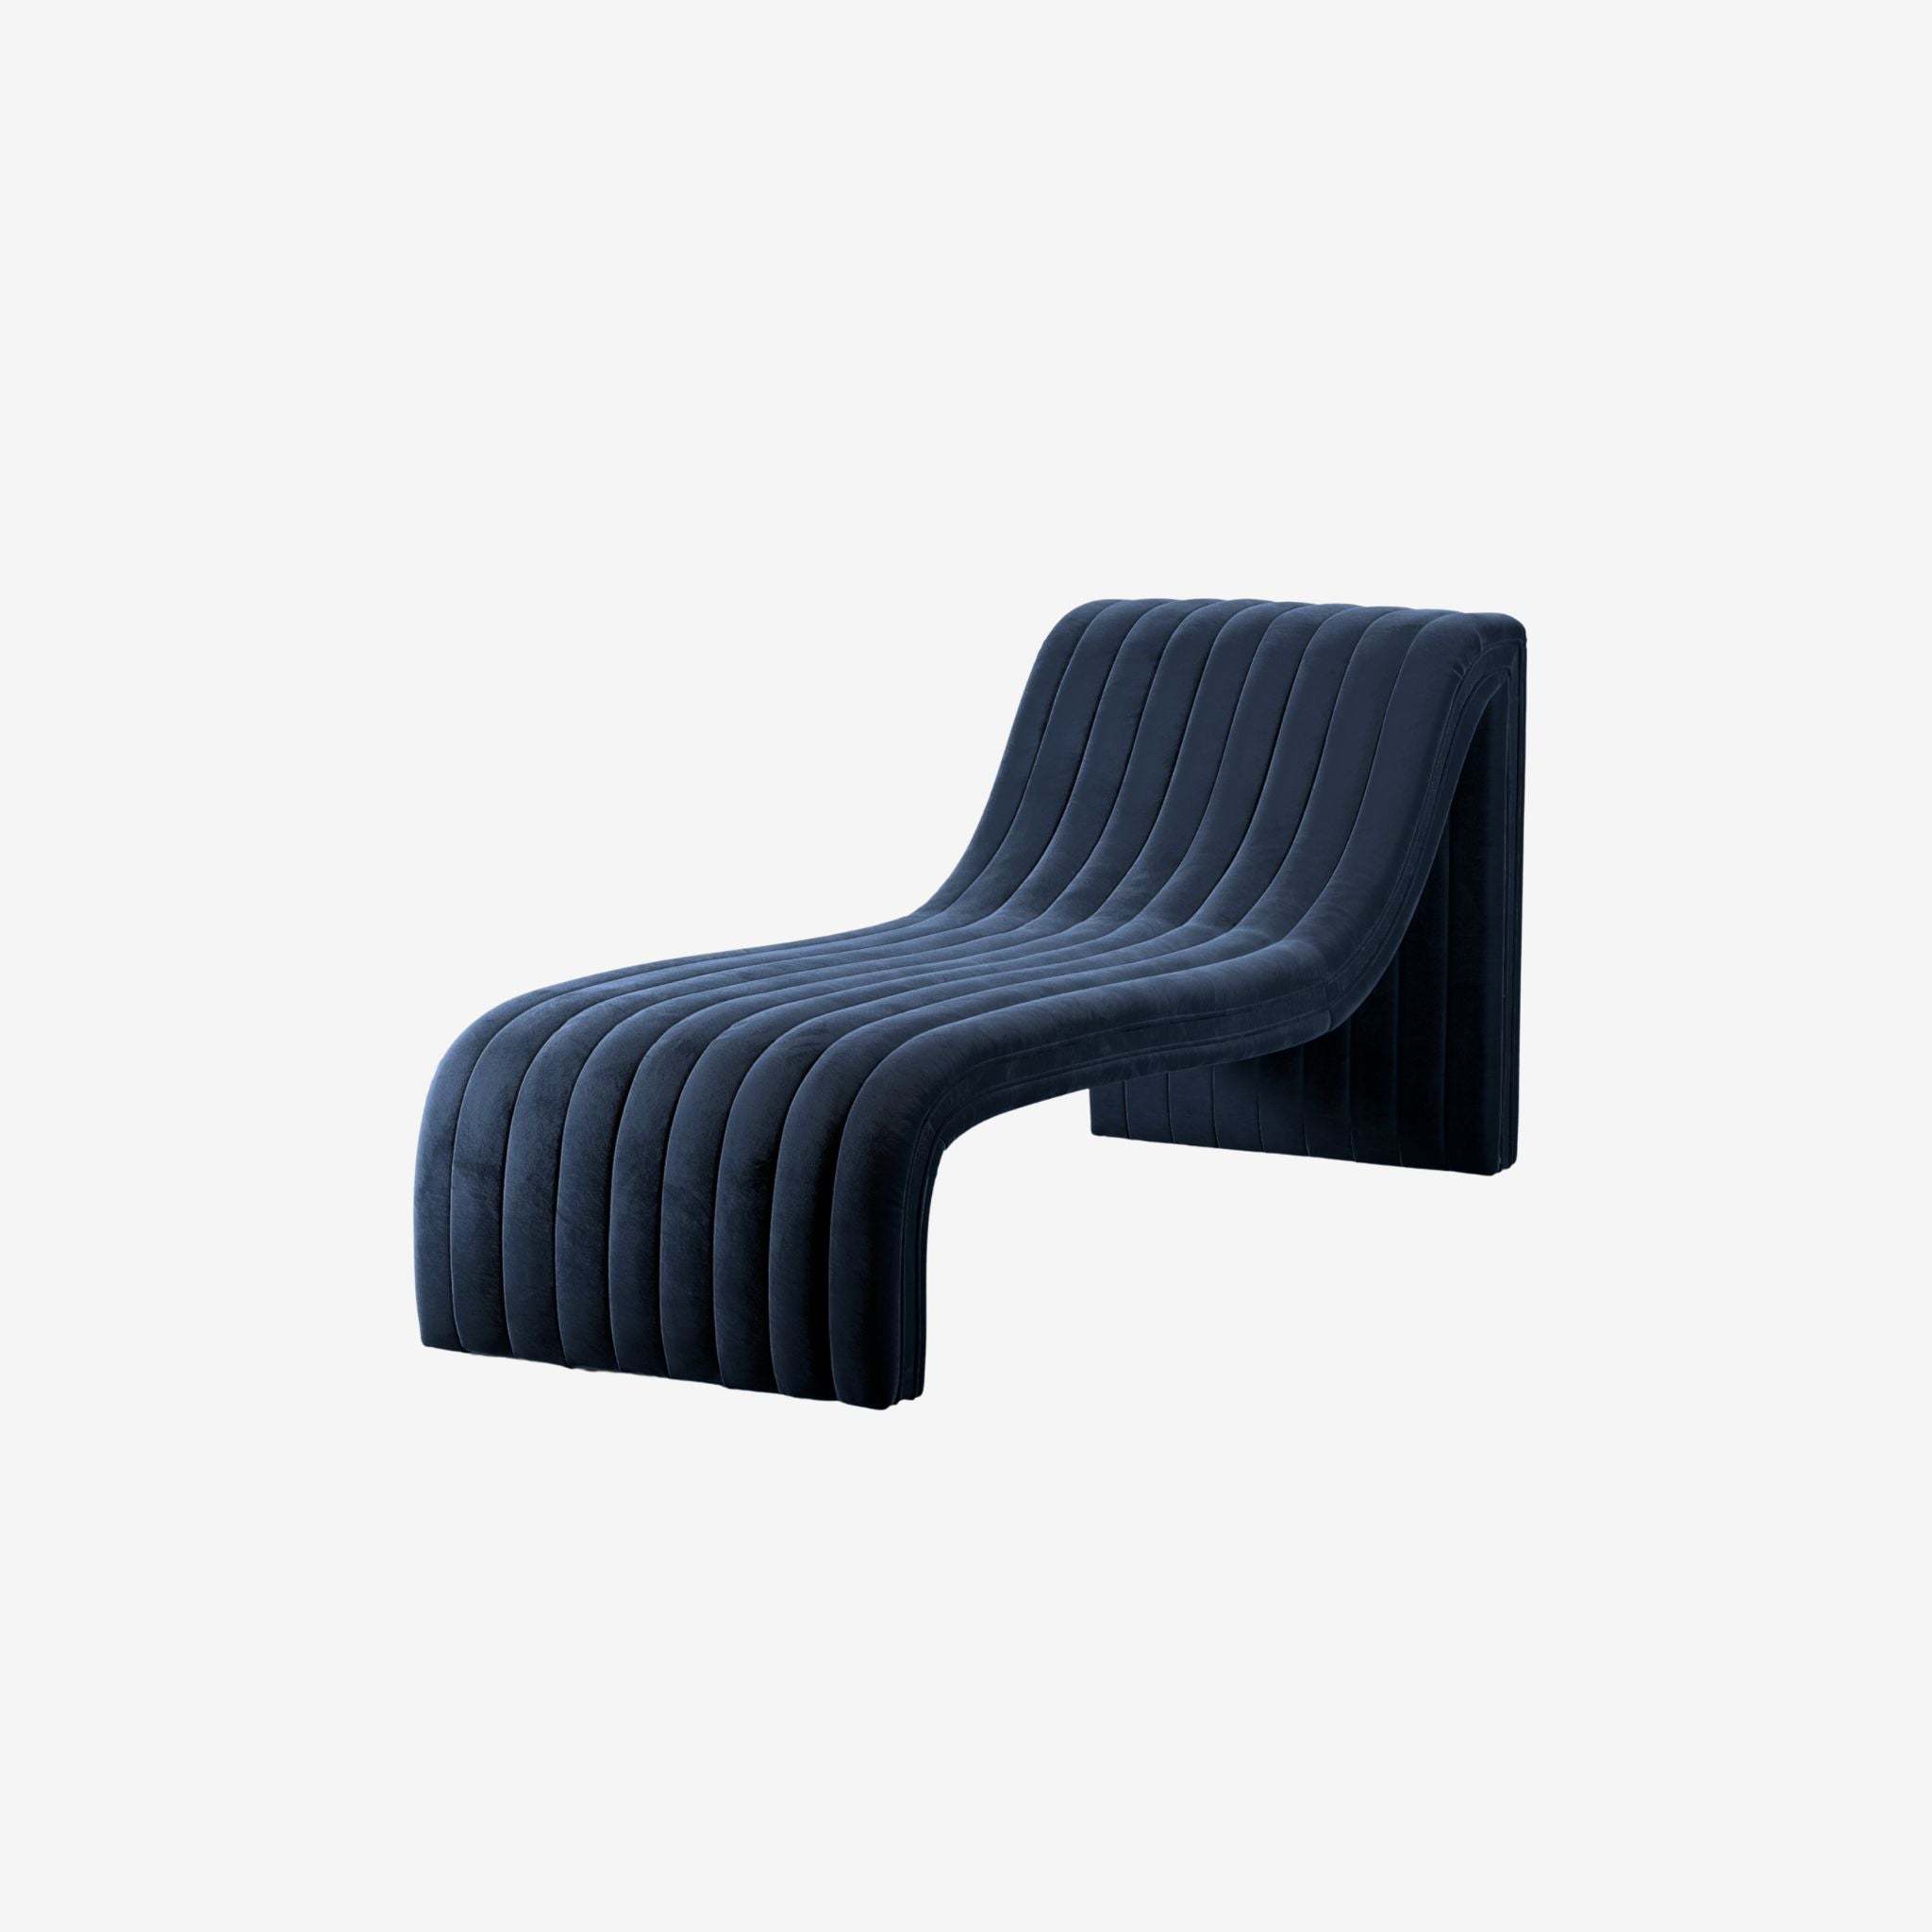 AUGUSTINE CHAISE LOUNGE - SAPPHIRE NAVY